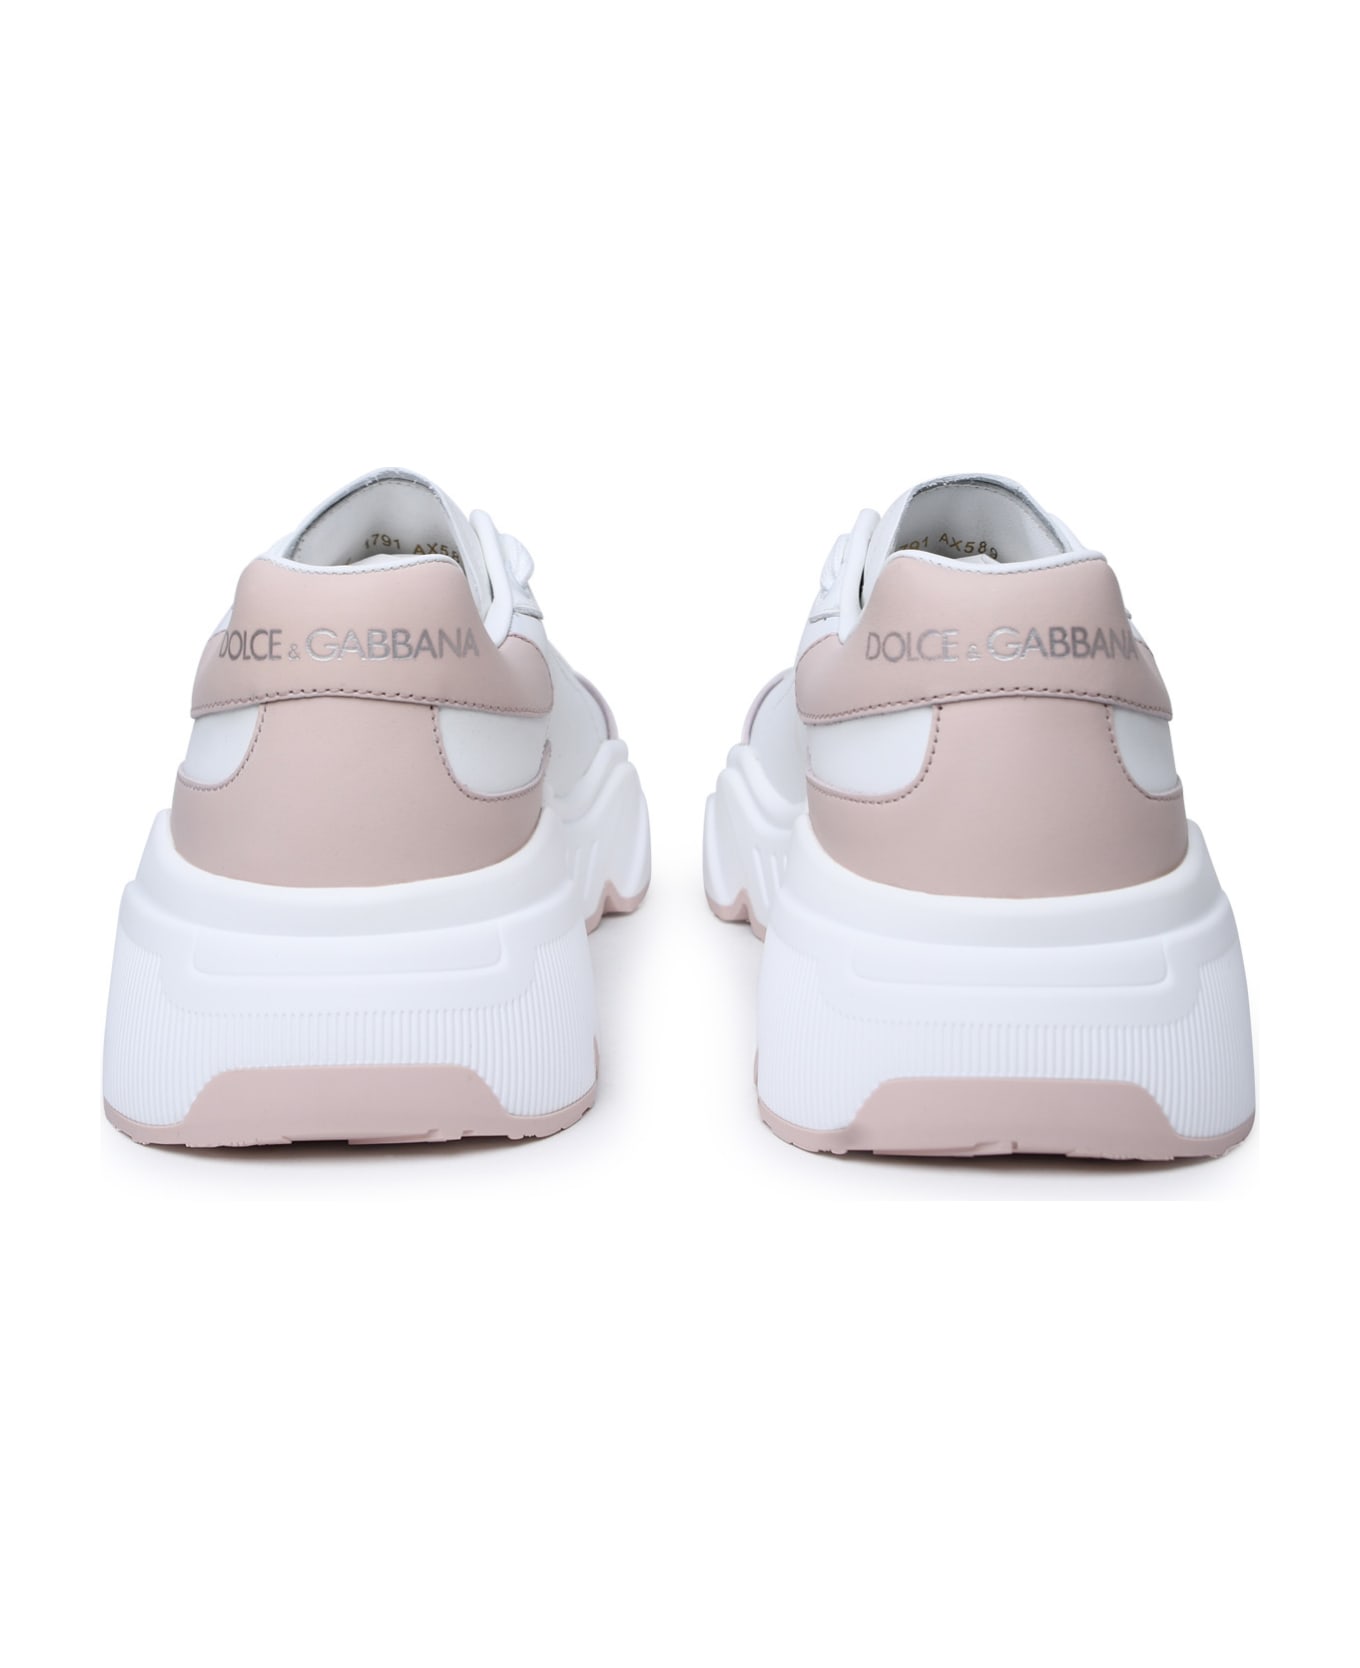 Dolce & Gabbana 'daymaster' White Leather Sneakers - Pink スニーカー